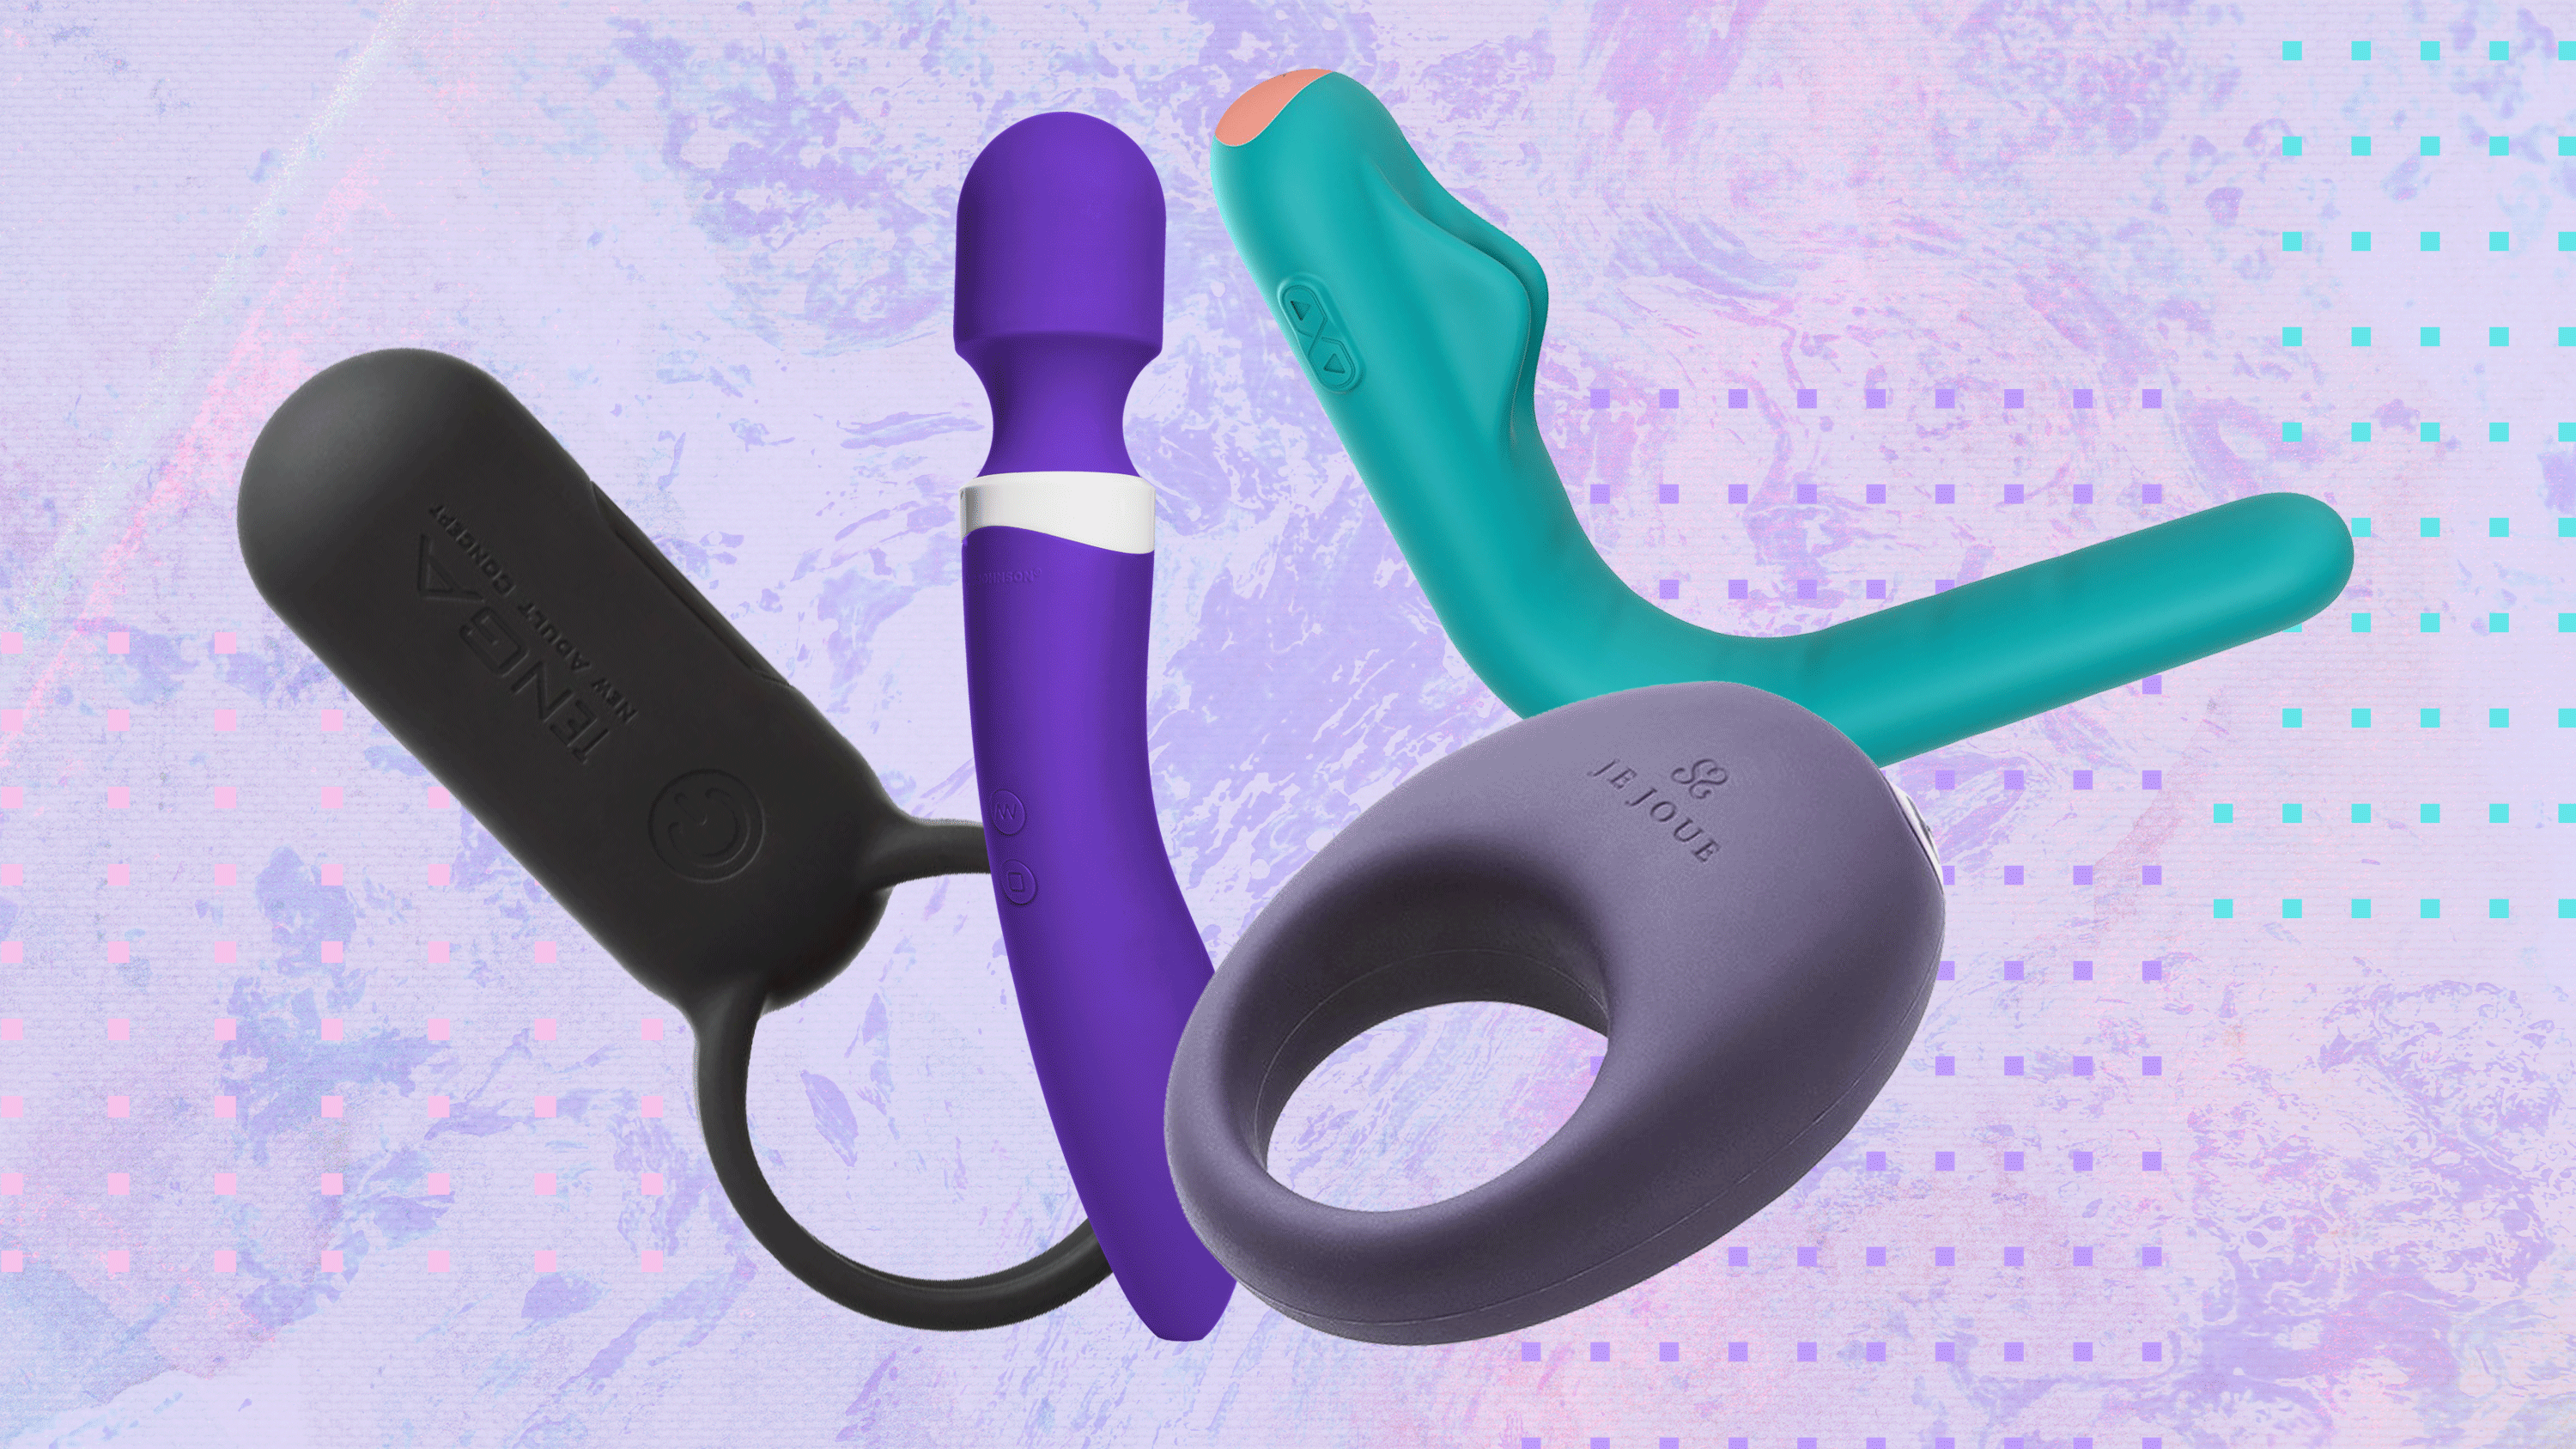 Getting freaky with buttplug vibe